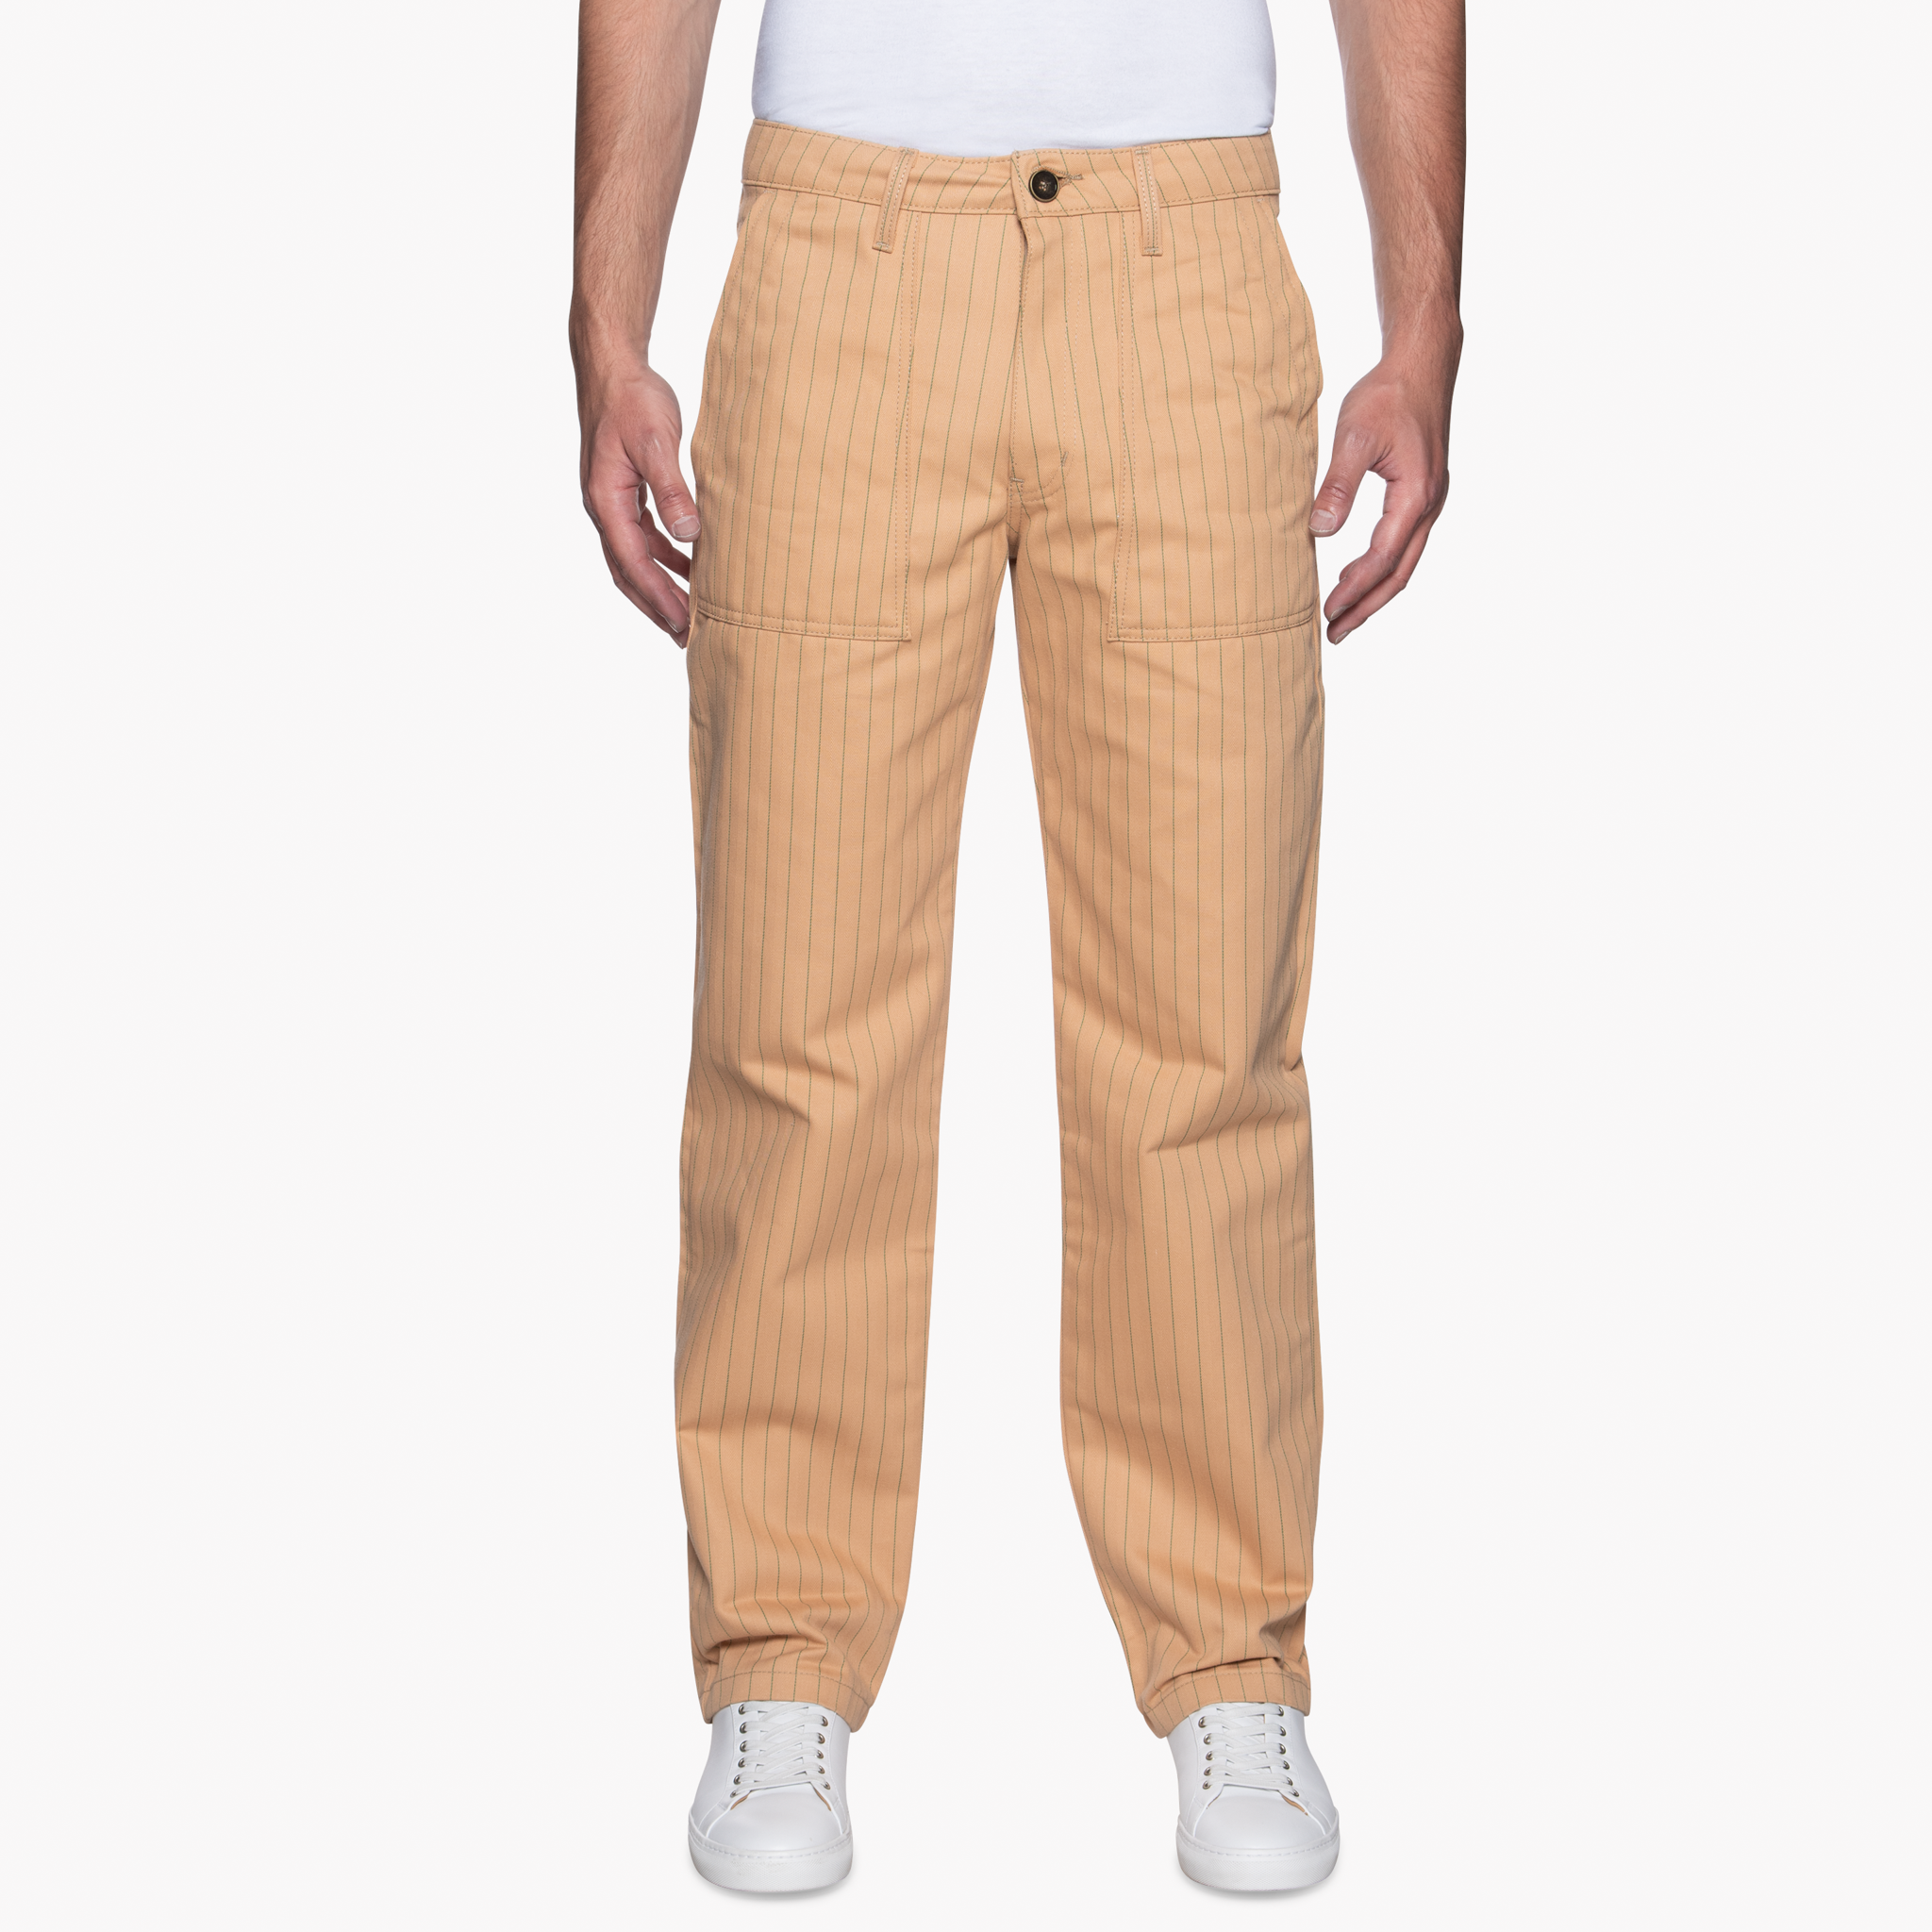  Work Pant - Repro Workwear Twill Peach - front 